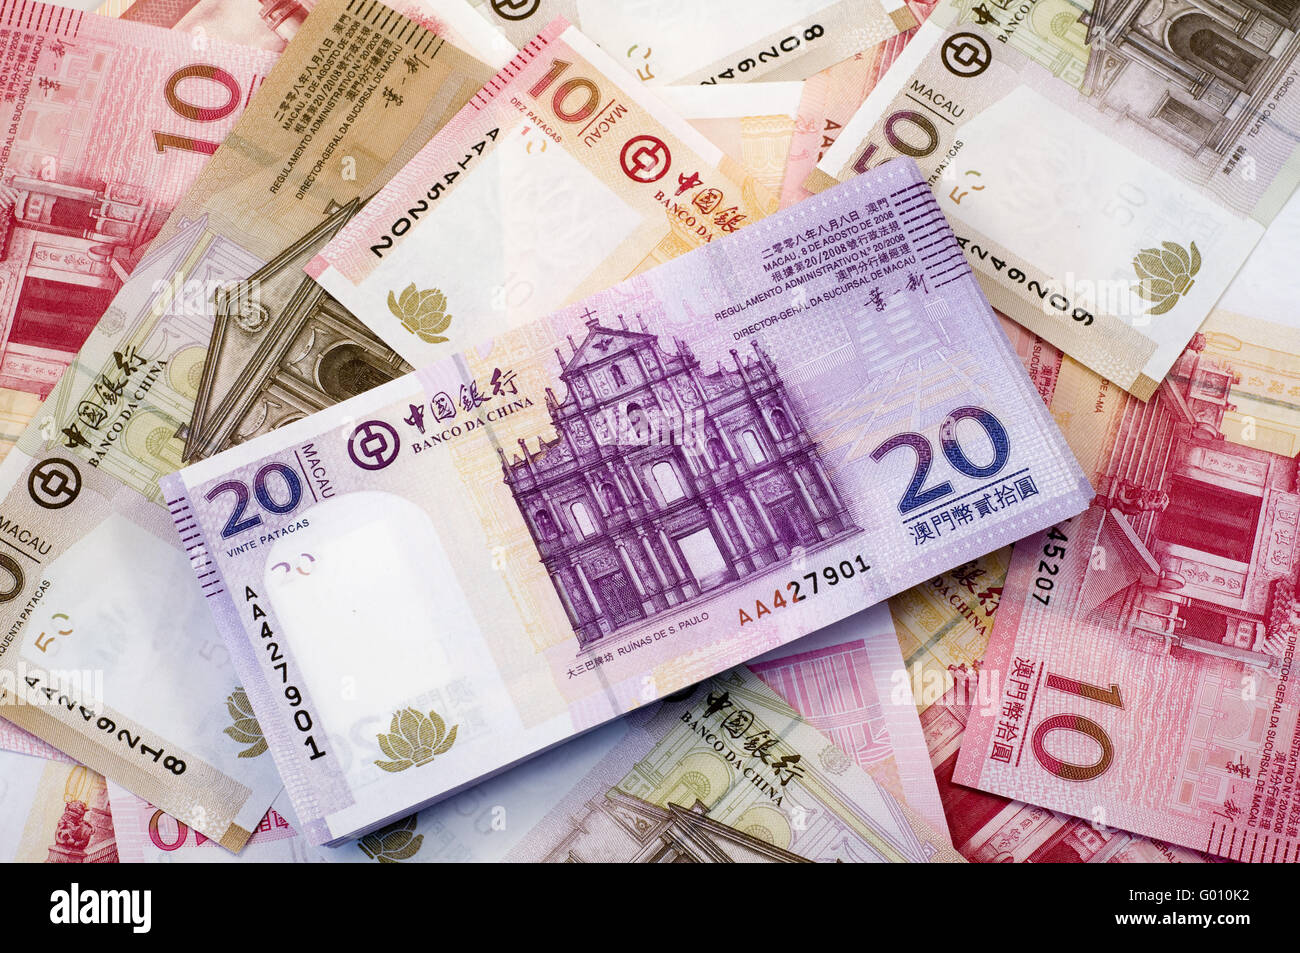 The stack of Macau Patacas (notes) and background Stock Photo